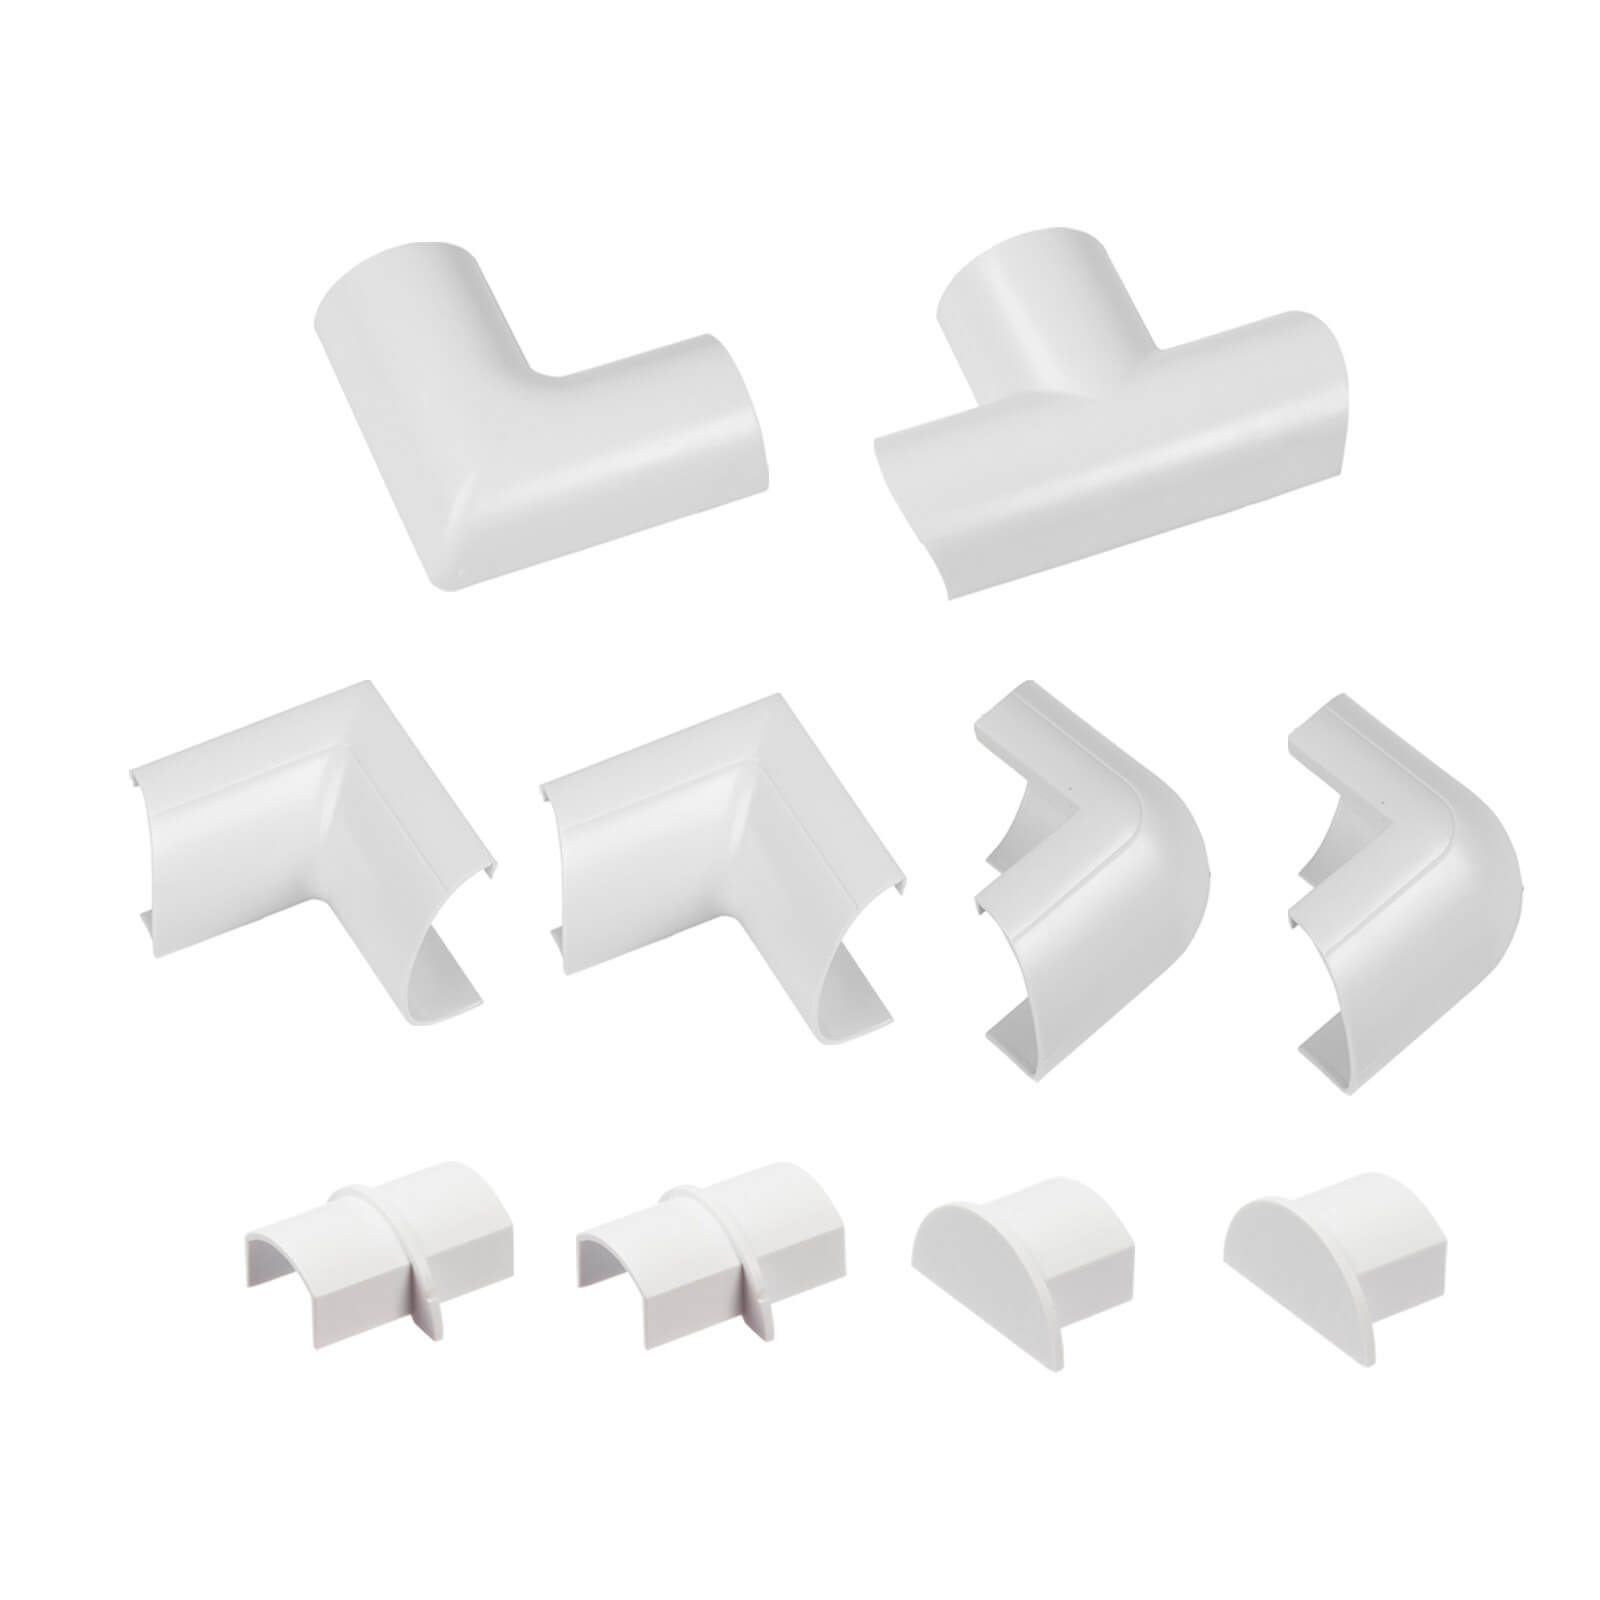 Photo of D-line Mini Decorative Trunking Clip Over 10 Piece Accessory Multipack 30mm X 15mm White